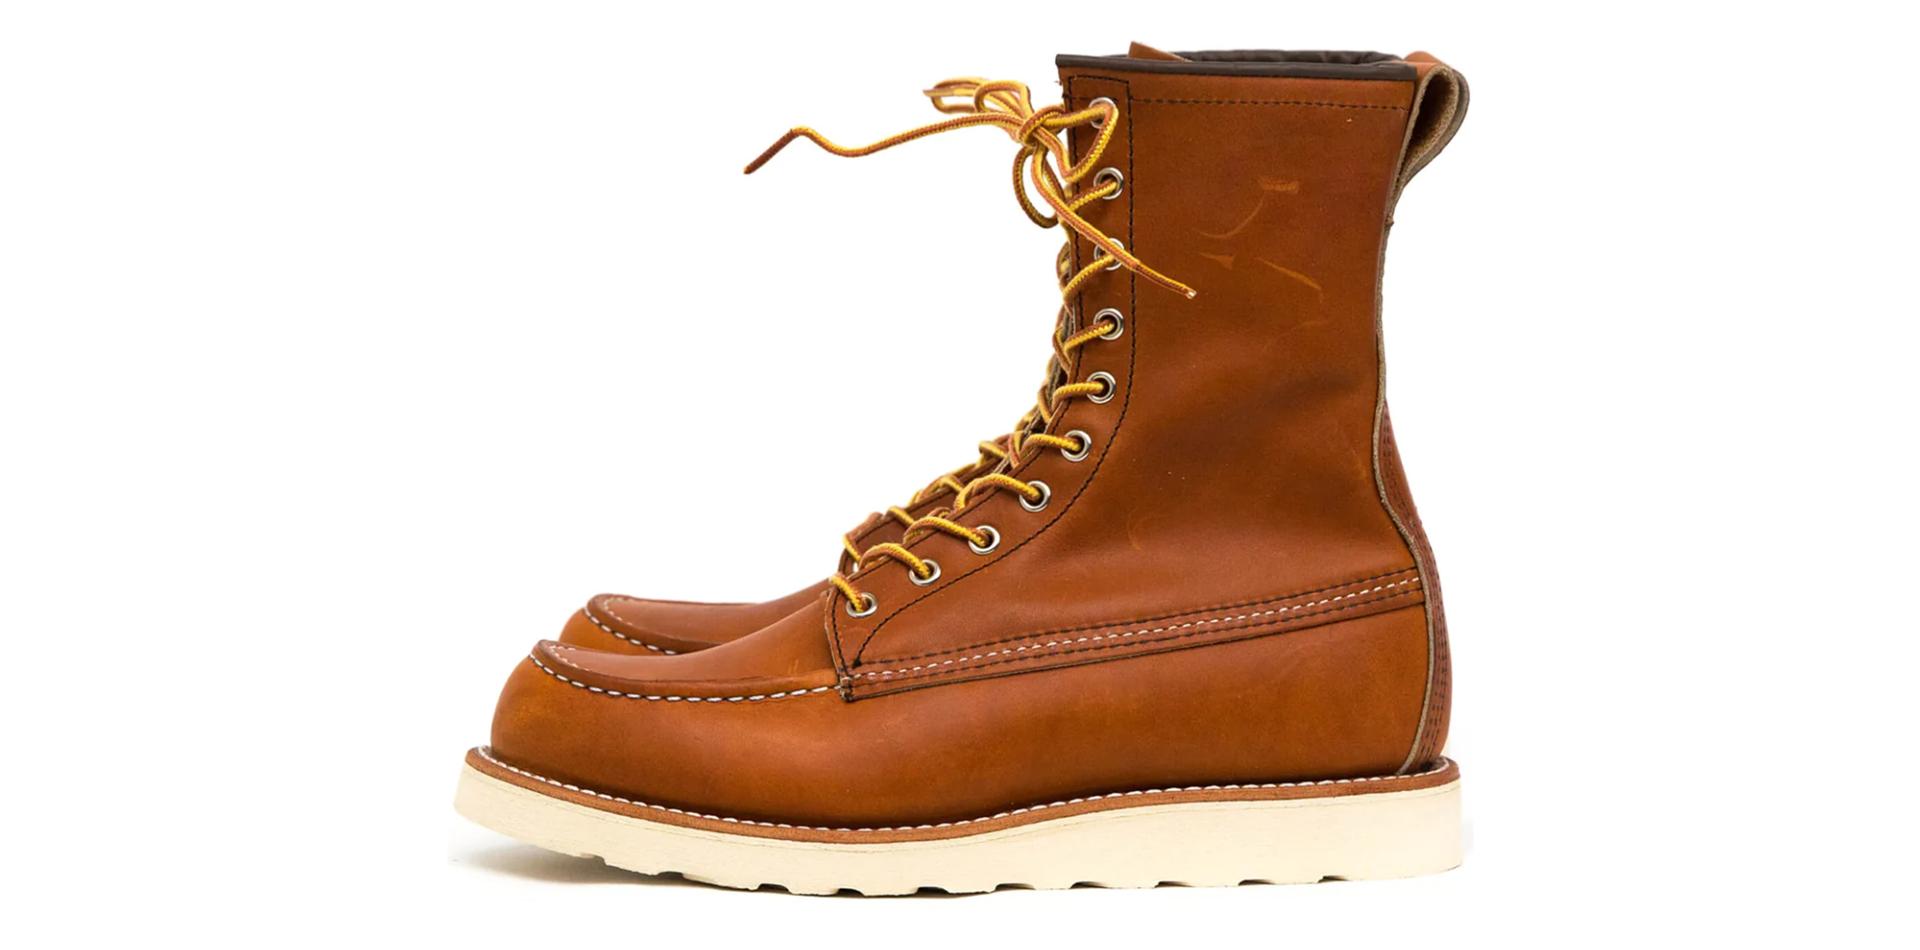 RED WING 877